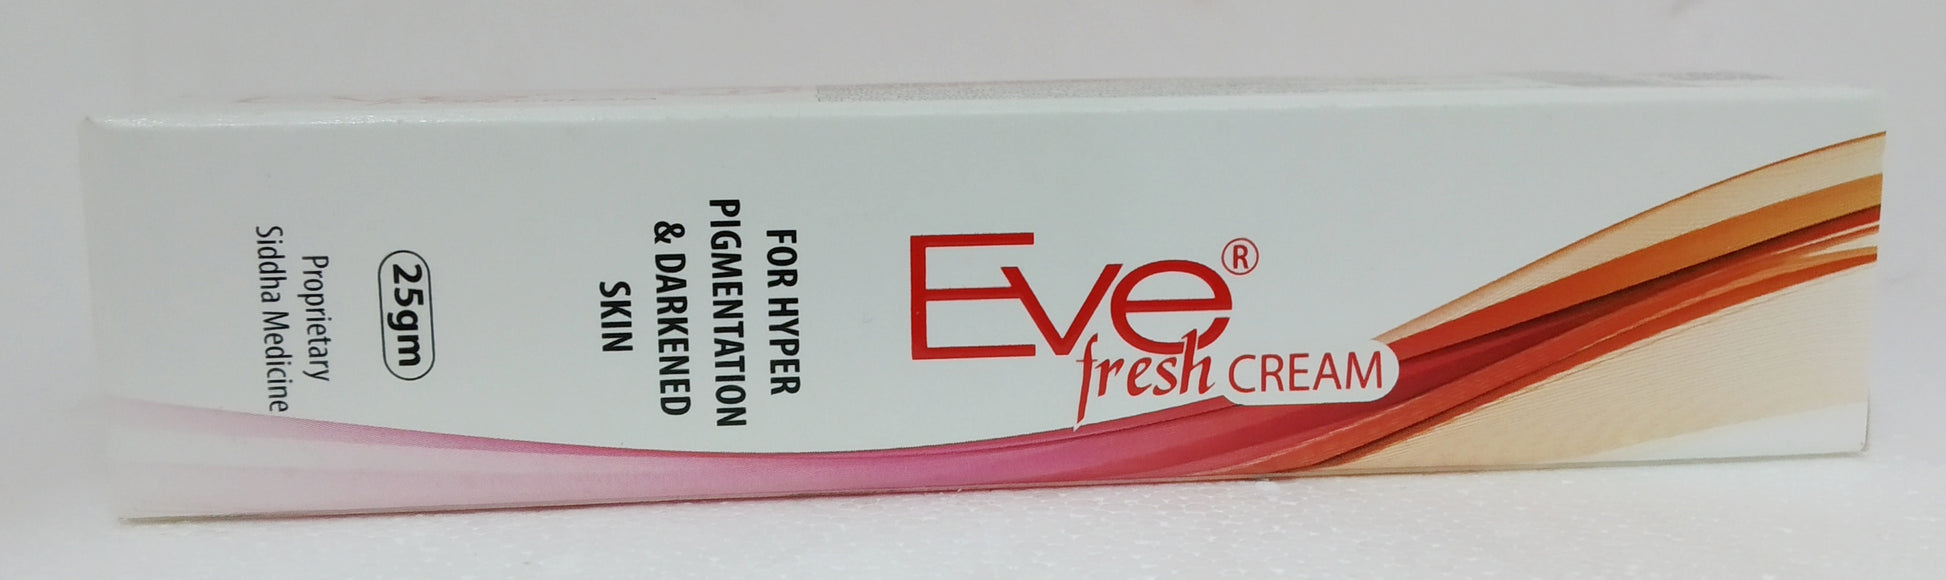 Shop Dr.JRK Eve Fresh Cream 25gm at price 130.00 from Dr.JRK Online - Ayush Care